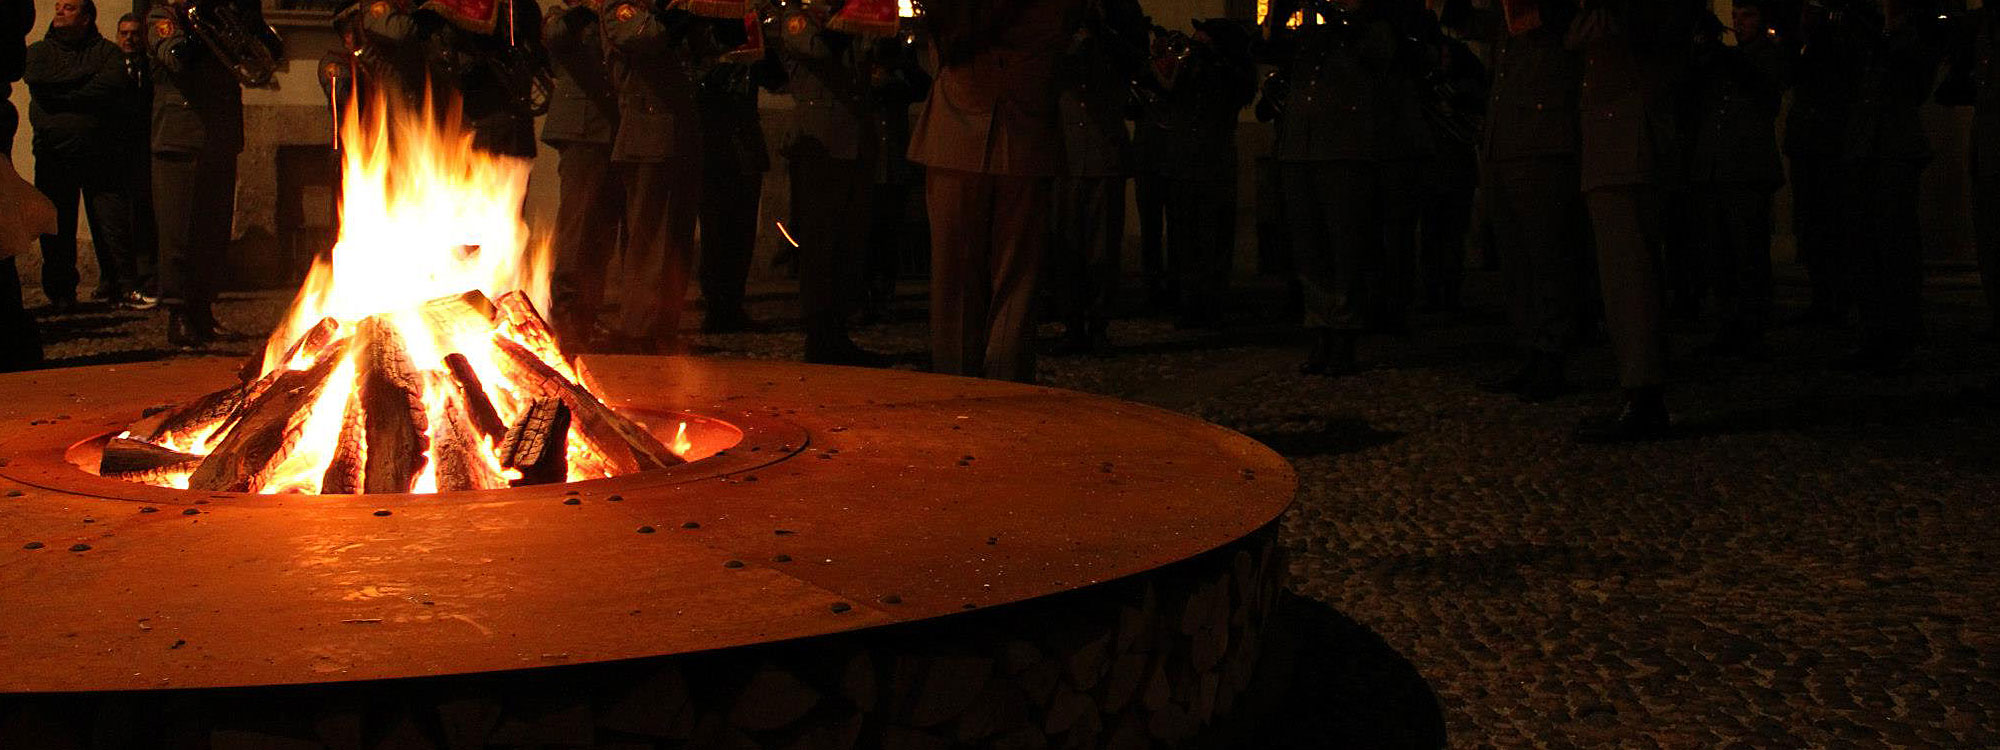 Image of flaming embers held within Zero circular fire pit by AK47 Design